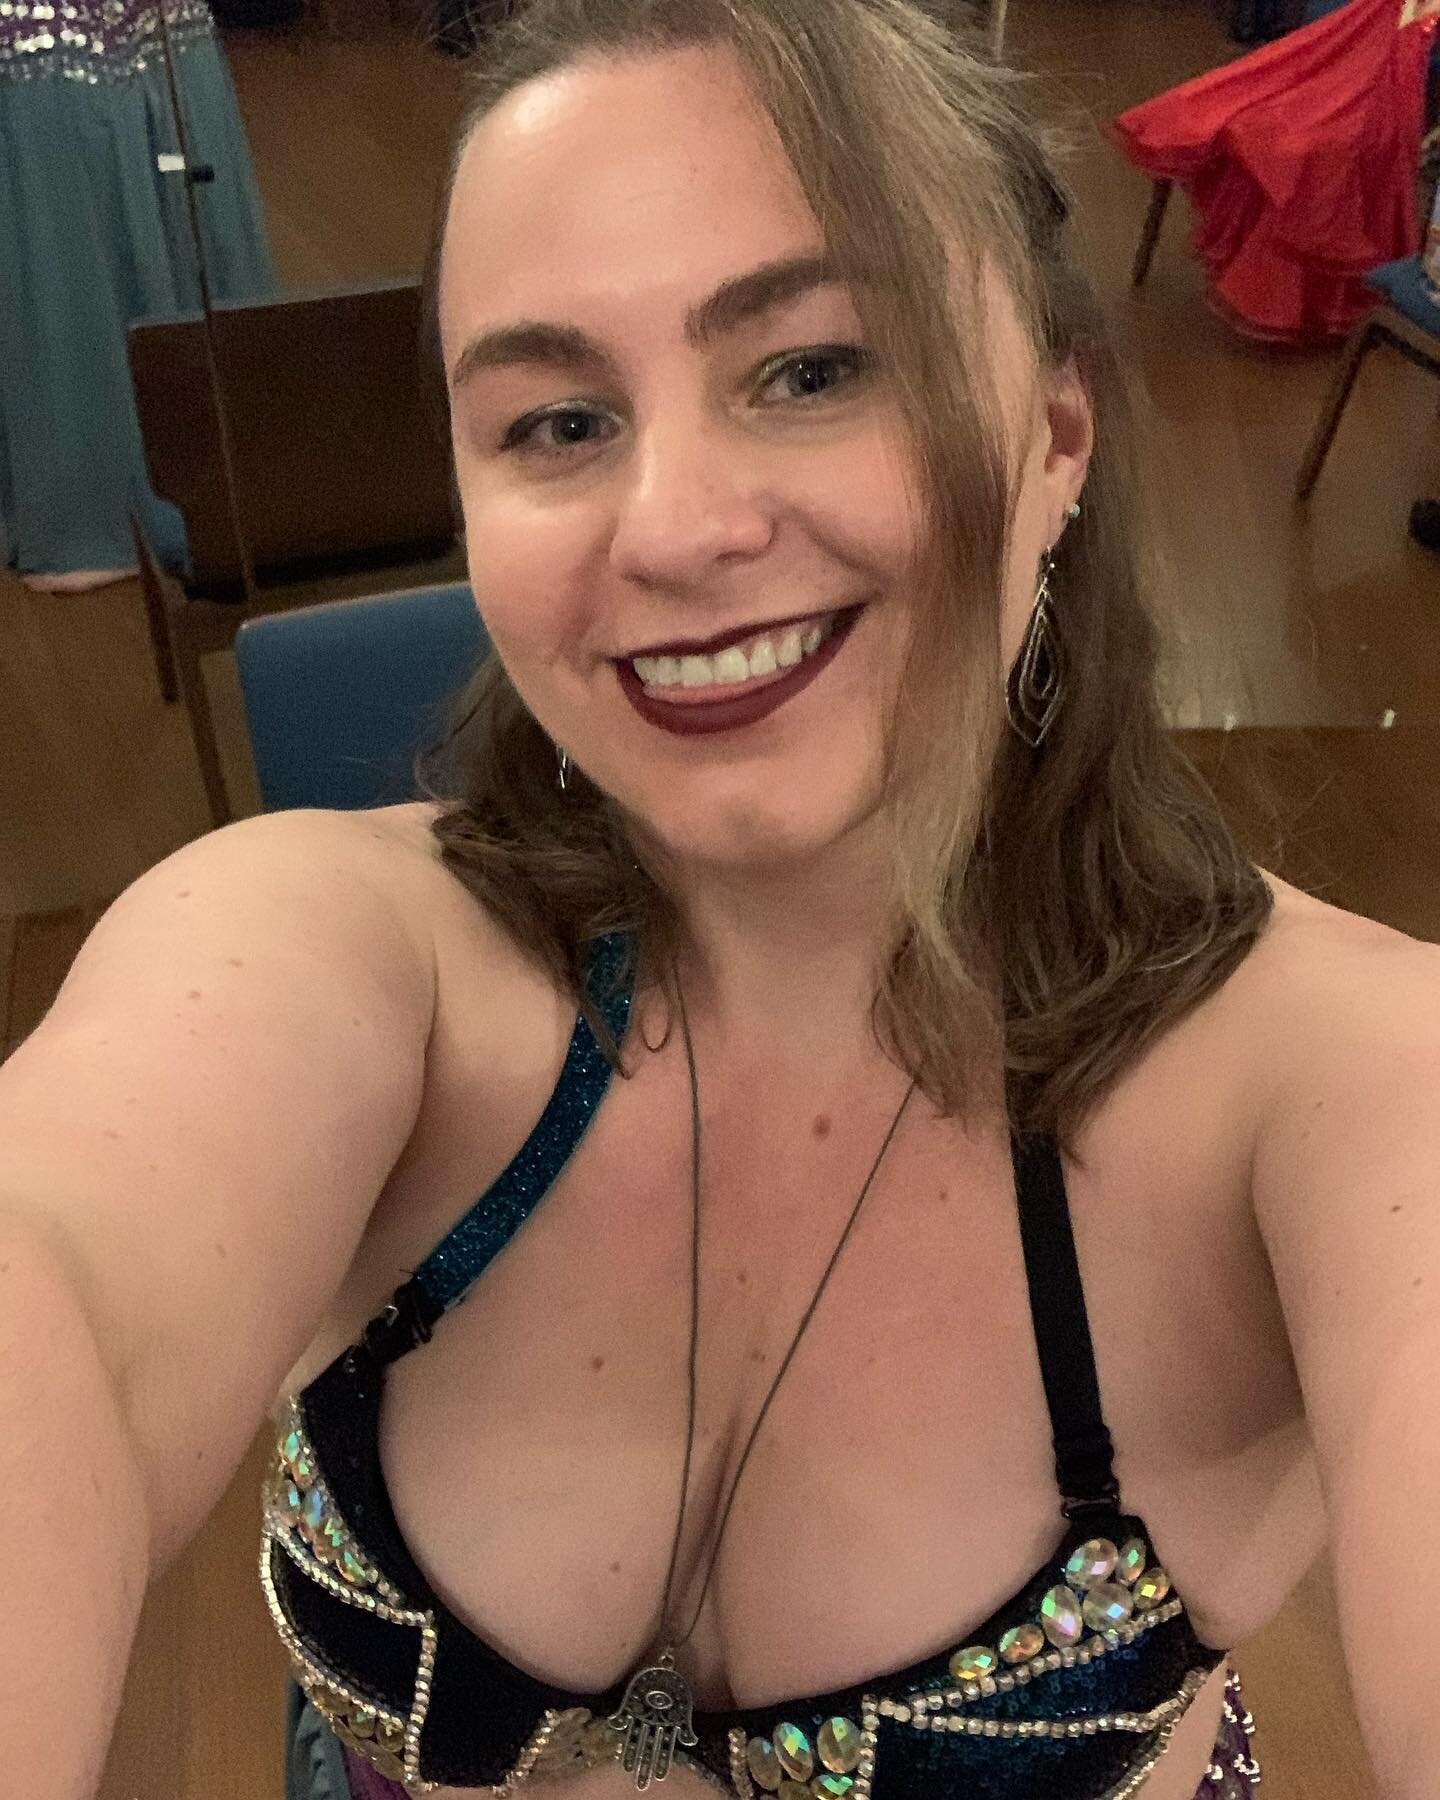 Belly dance definitely revitalizes my soul ❤️ thanks to House of Andromeda for another great show! Can&rsquo;t wait to collaborate with @andromedaboston and House of Andromeda with Ruby Grove in the future ✨💃 #bellydance